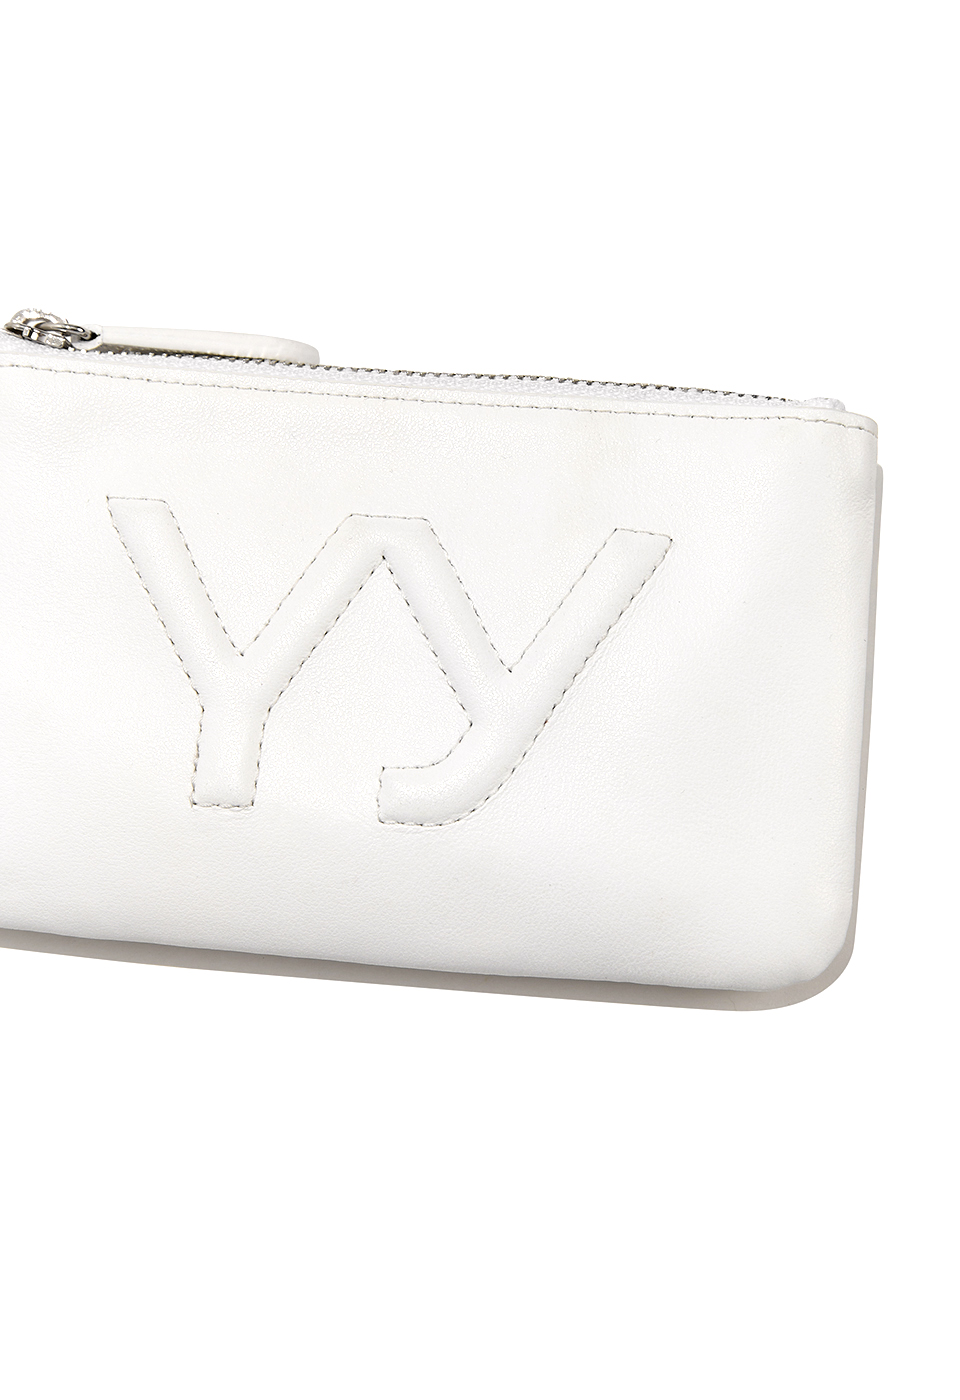 YY CHAIN WALLET WITH MIRROR, WHITE